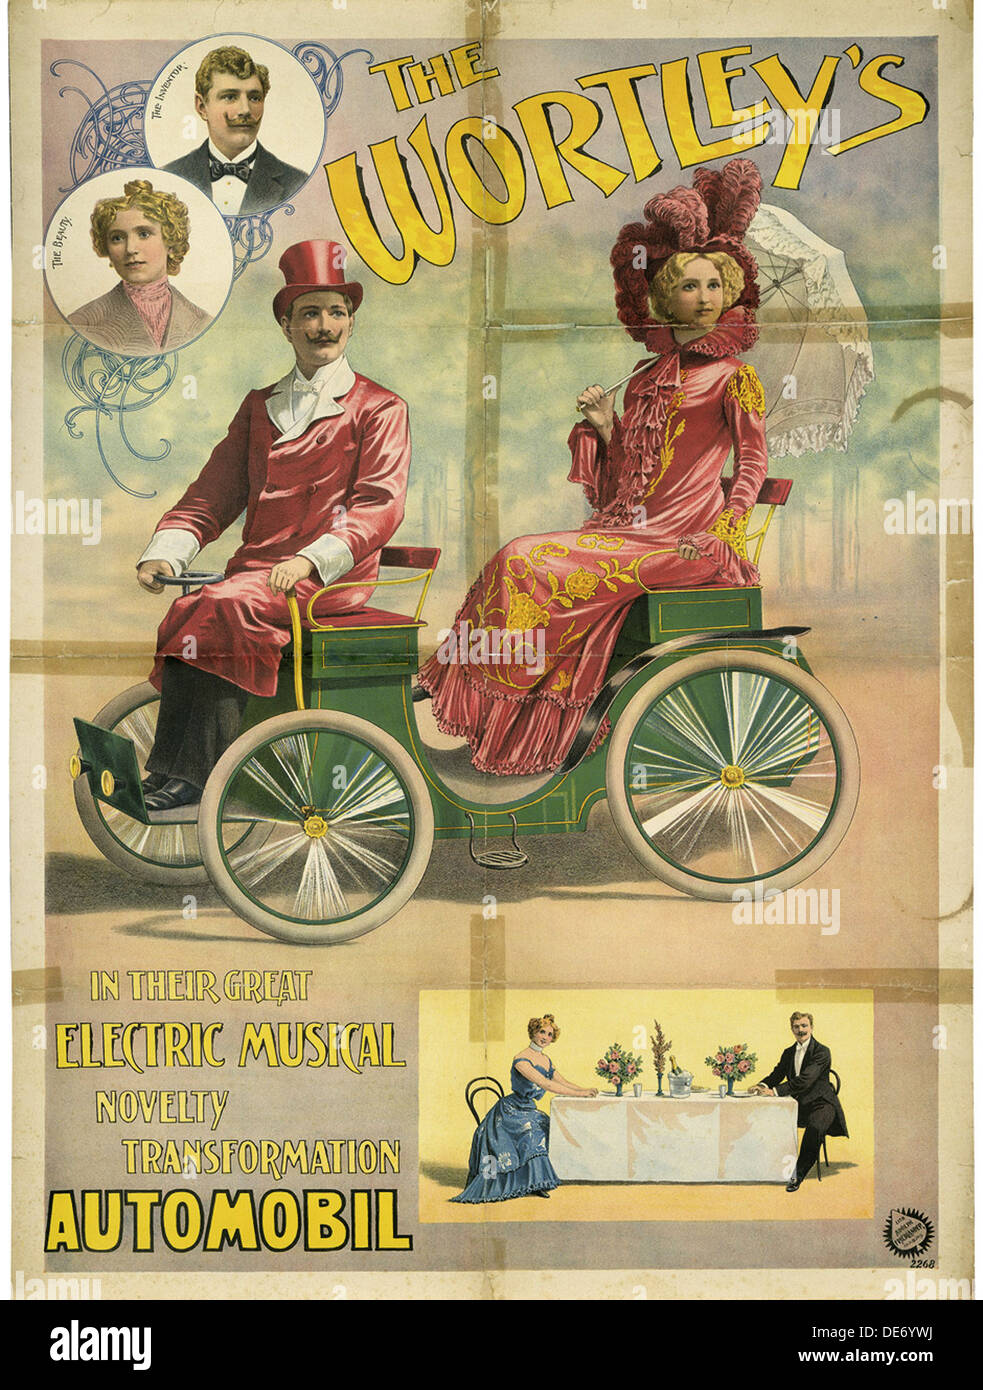 The Wortley's in their great electric musical novelty transformation Automobil, 1896. Artist: Friedländer, Adolph (1851-1904) Stock Photo